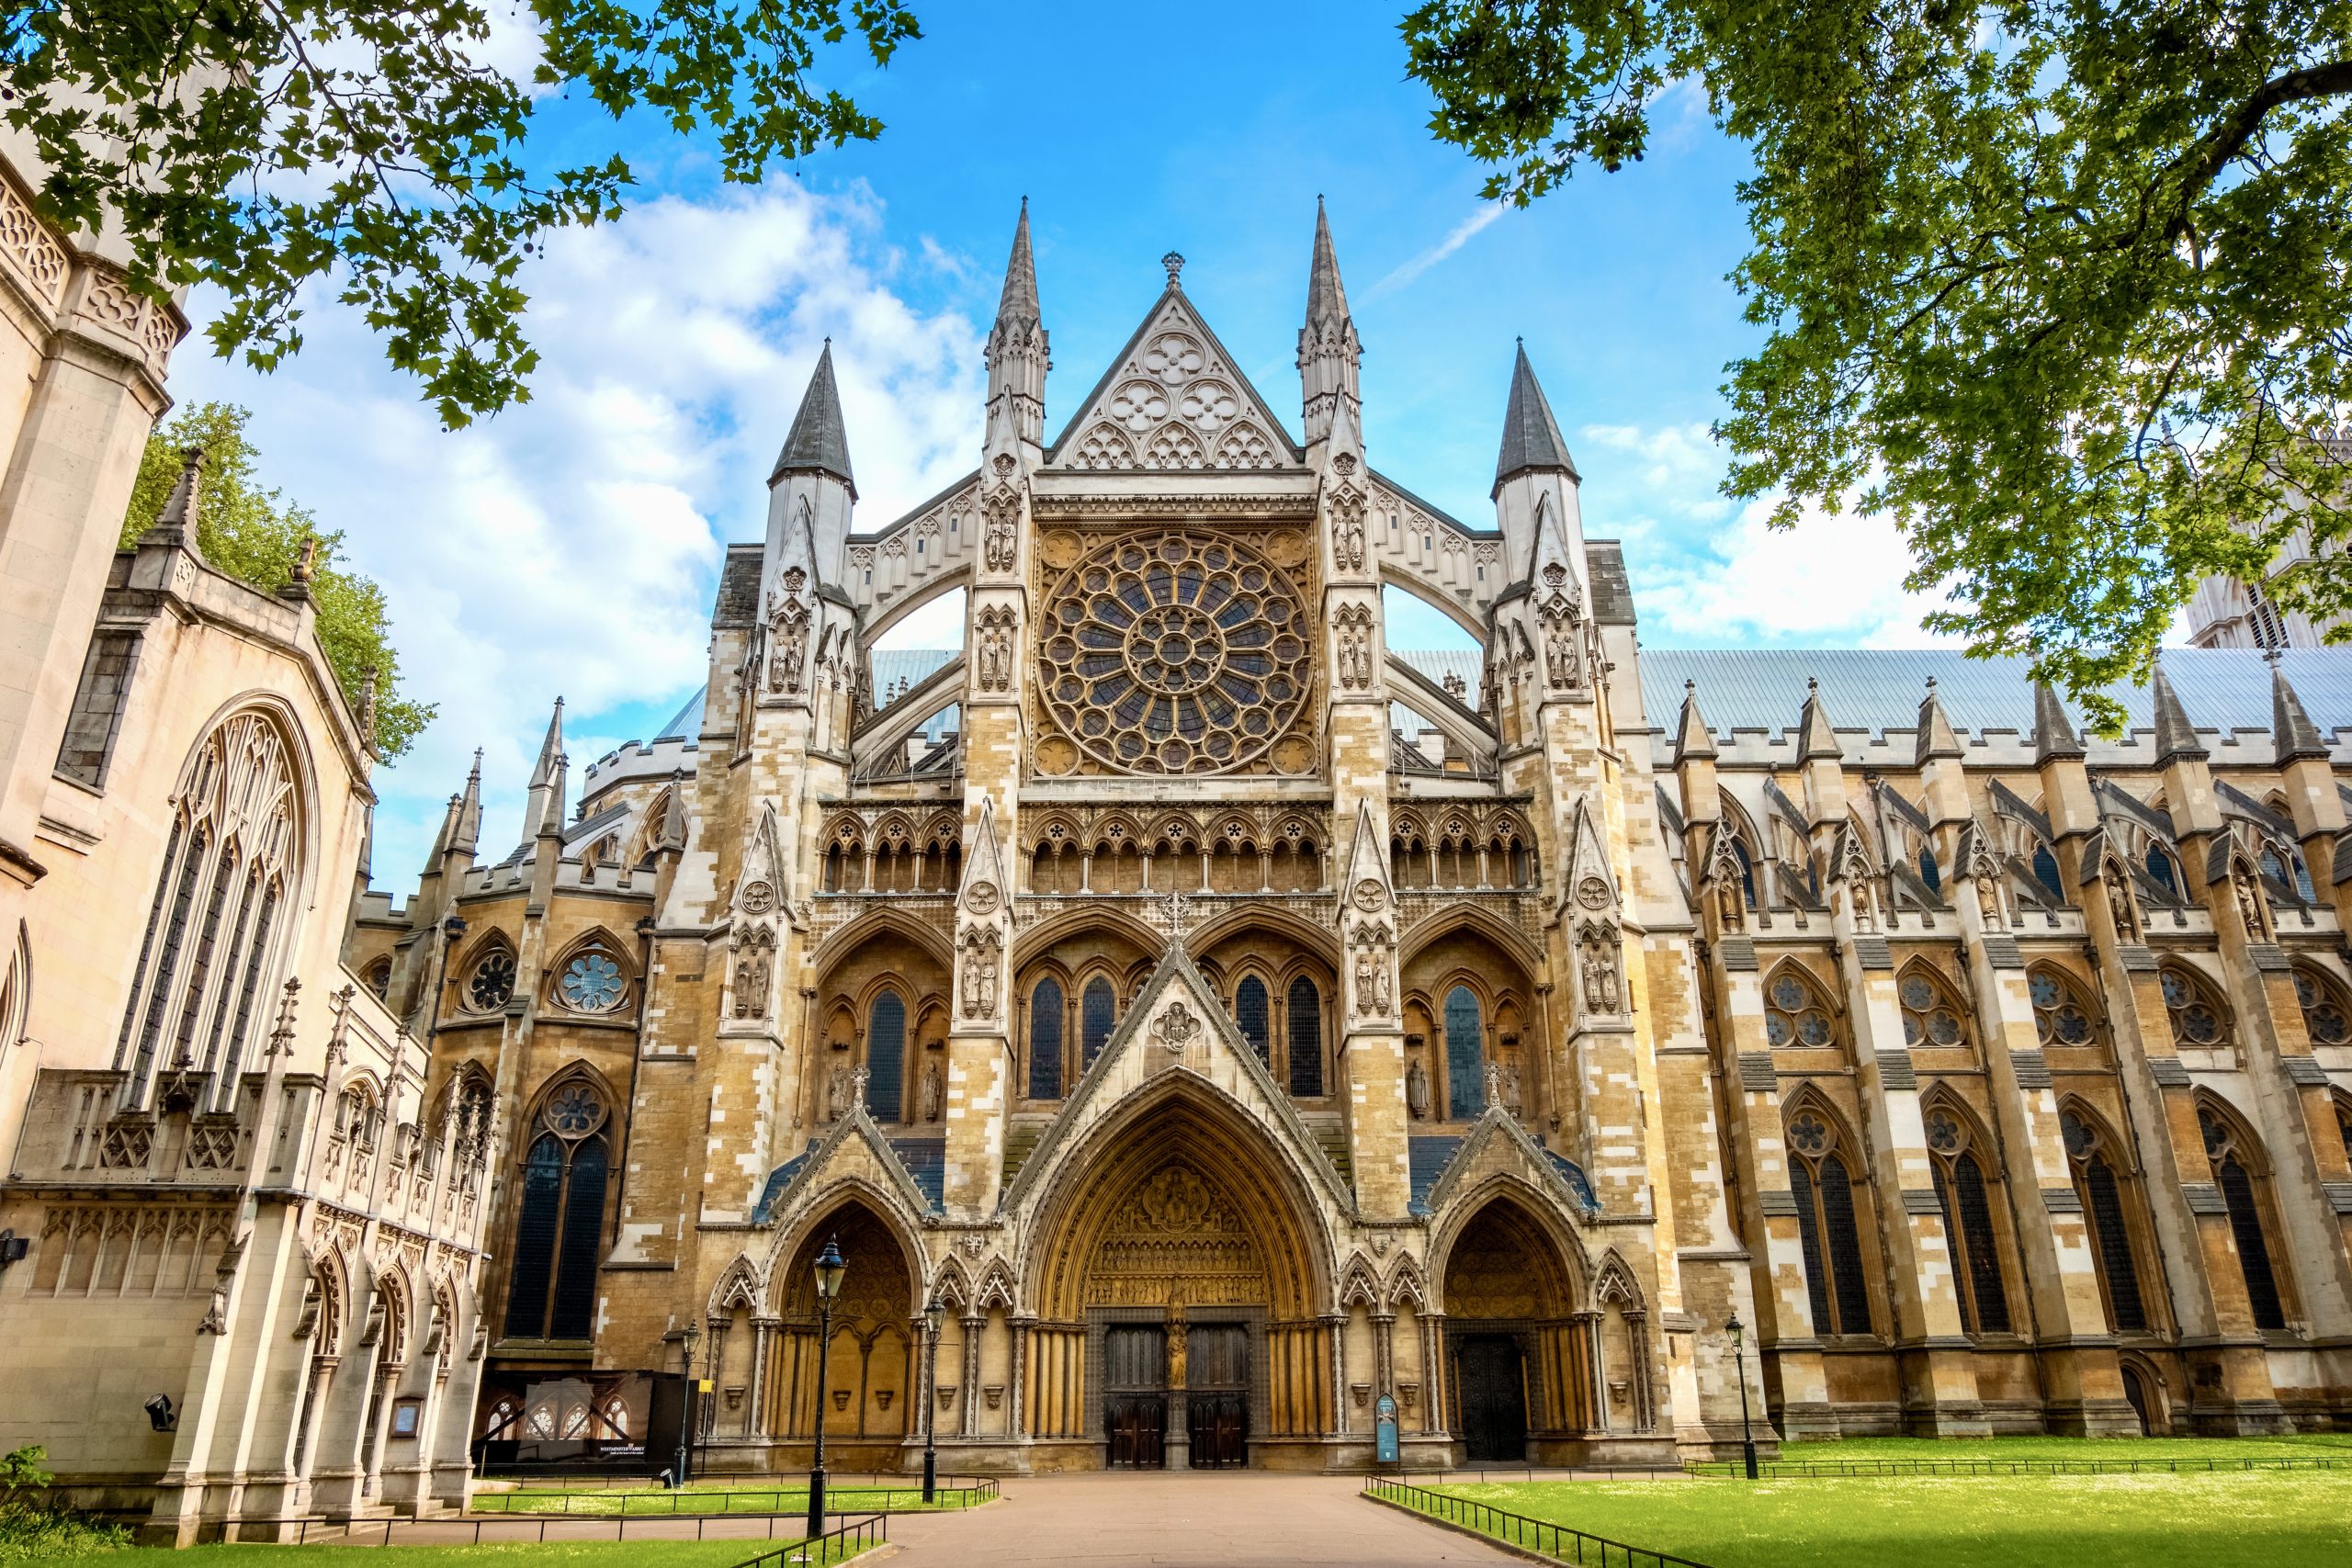 visit st paul's cathedral or westminster abbey